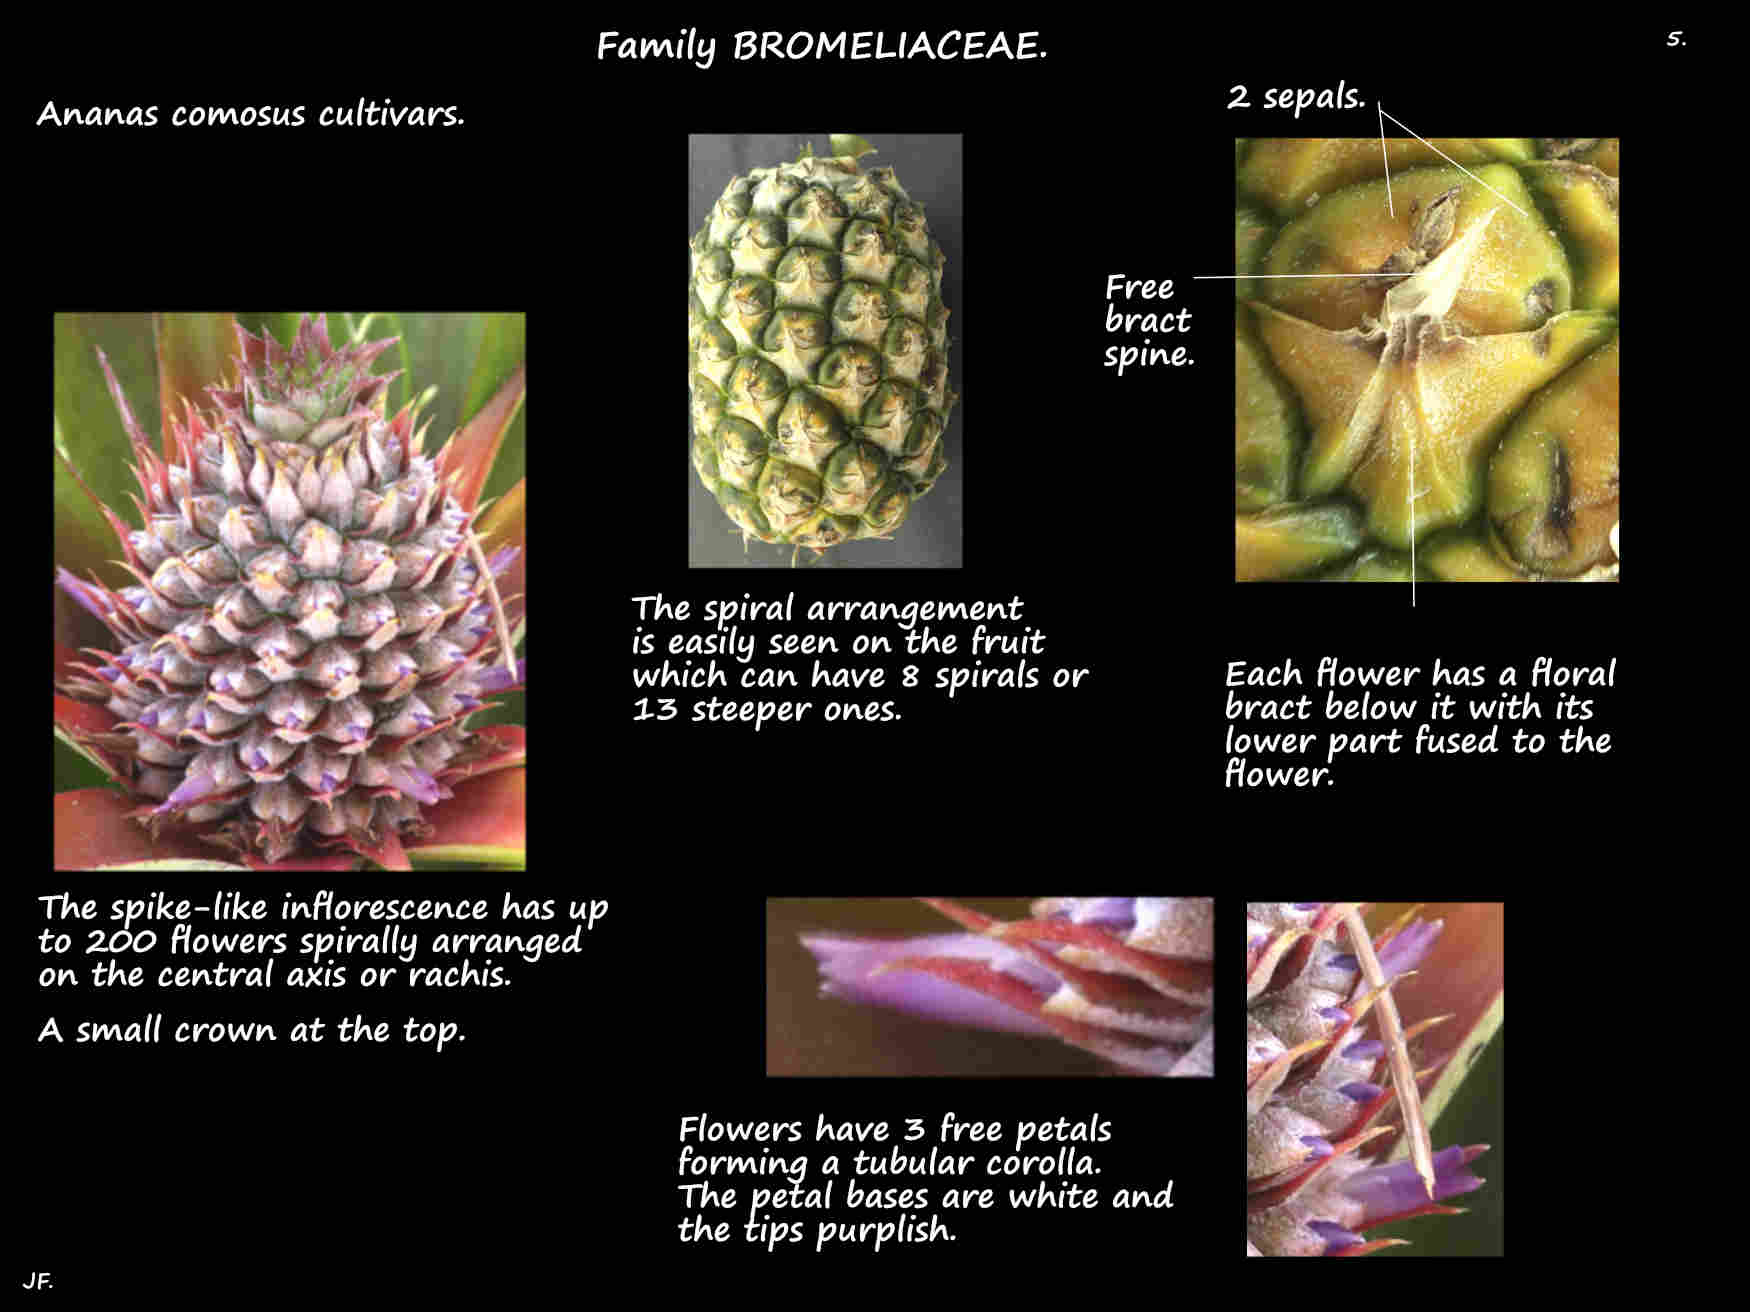 5 Ananas comosus flowers & floral bracts